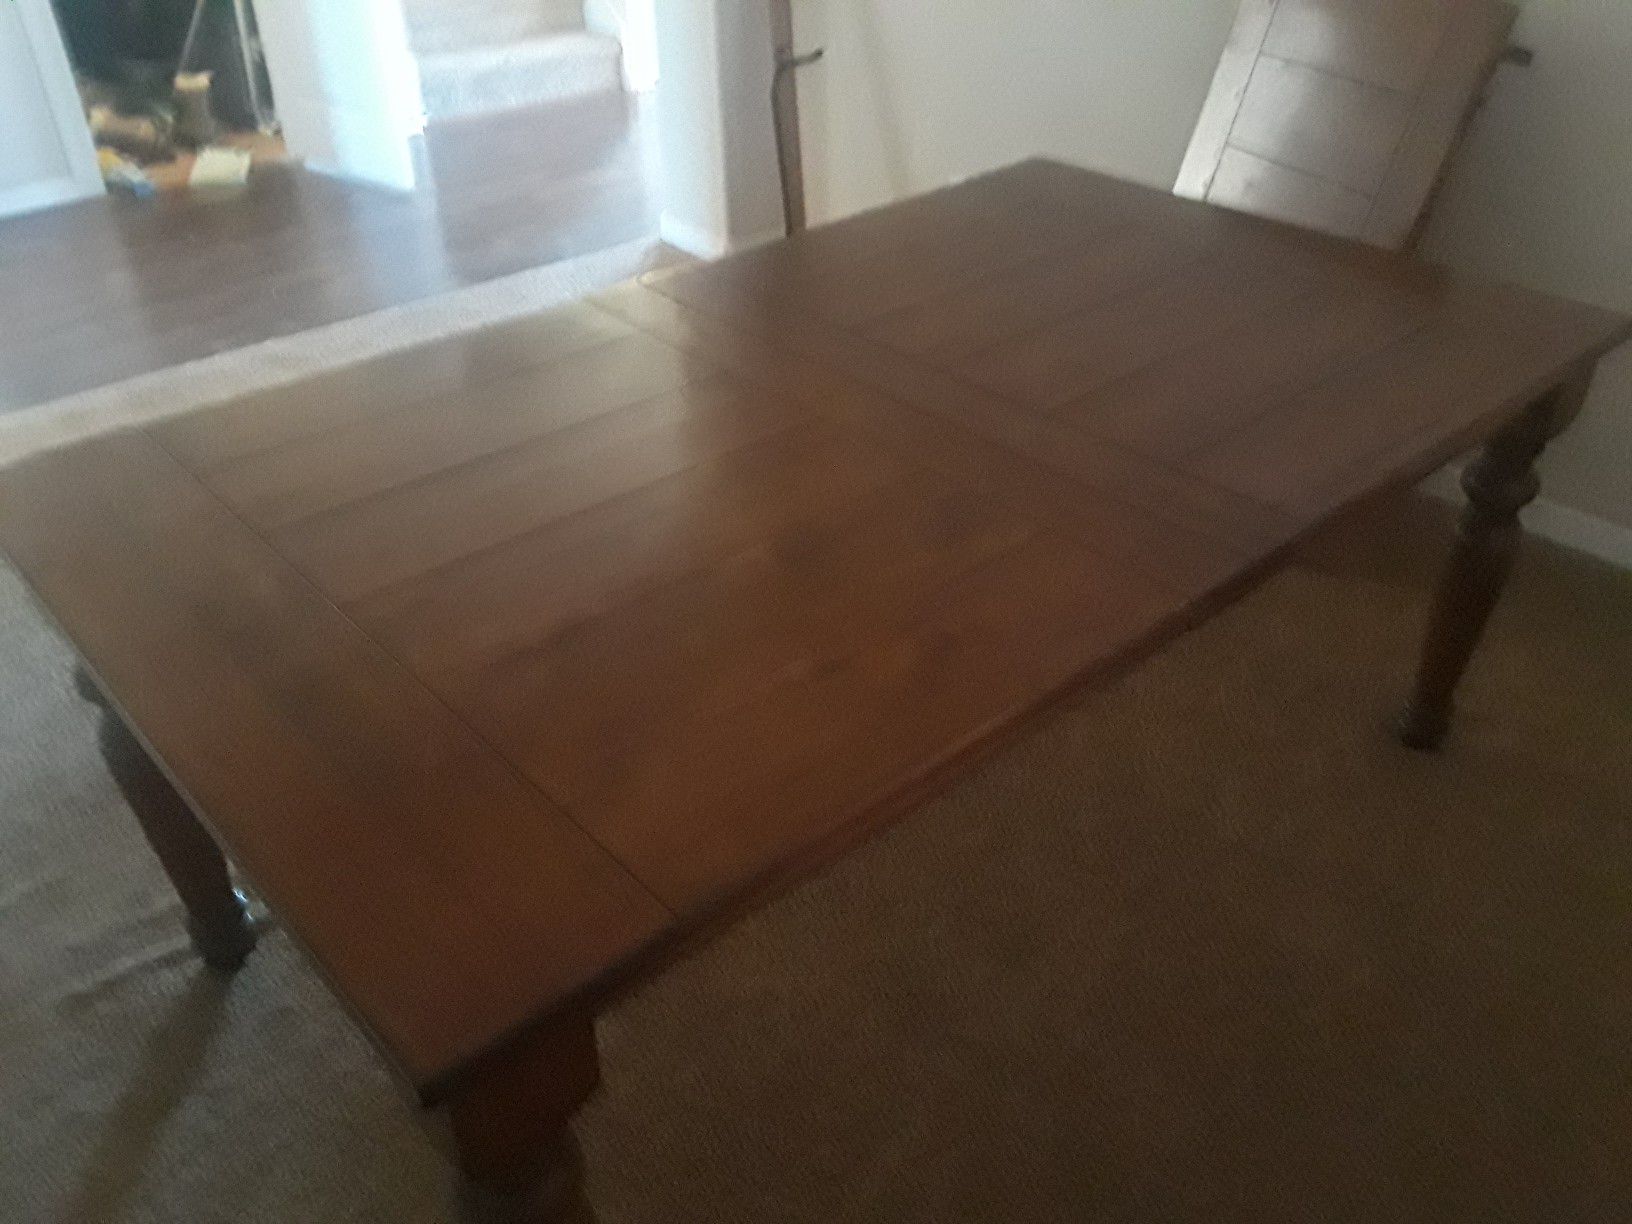 Fine formal dining table.